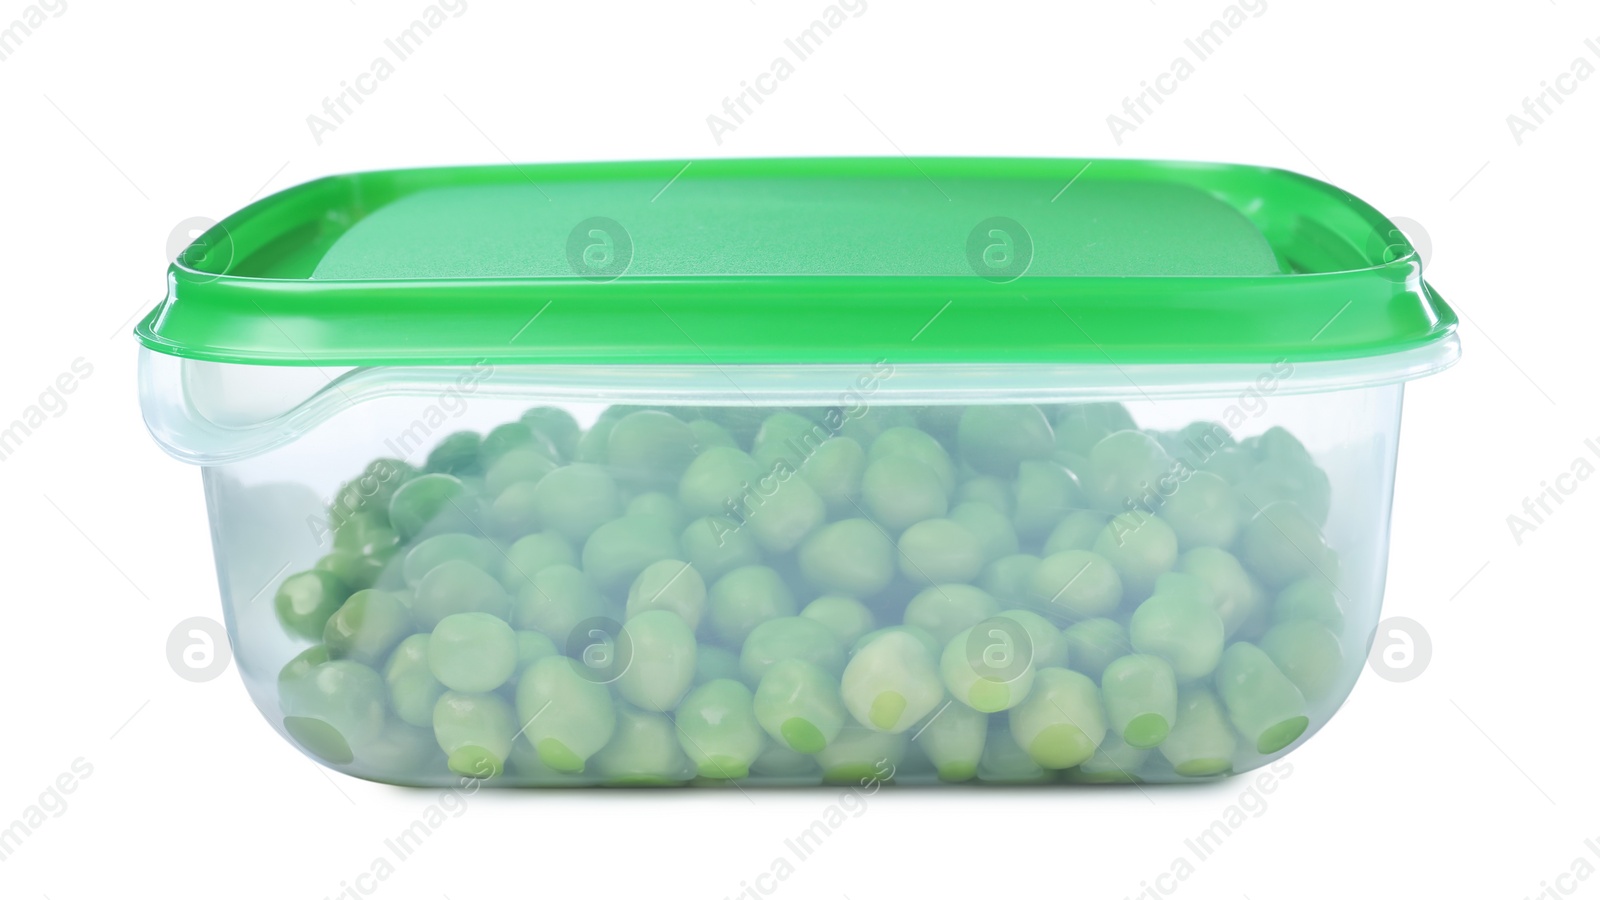 Photo of Fresh peas in plastic container isolated on white